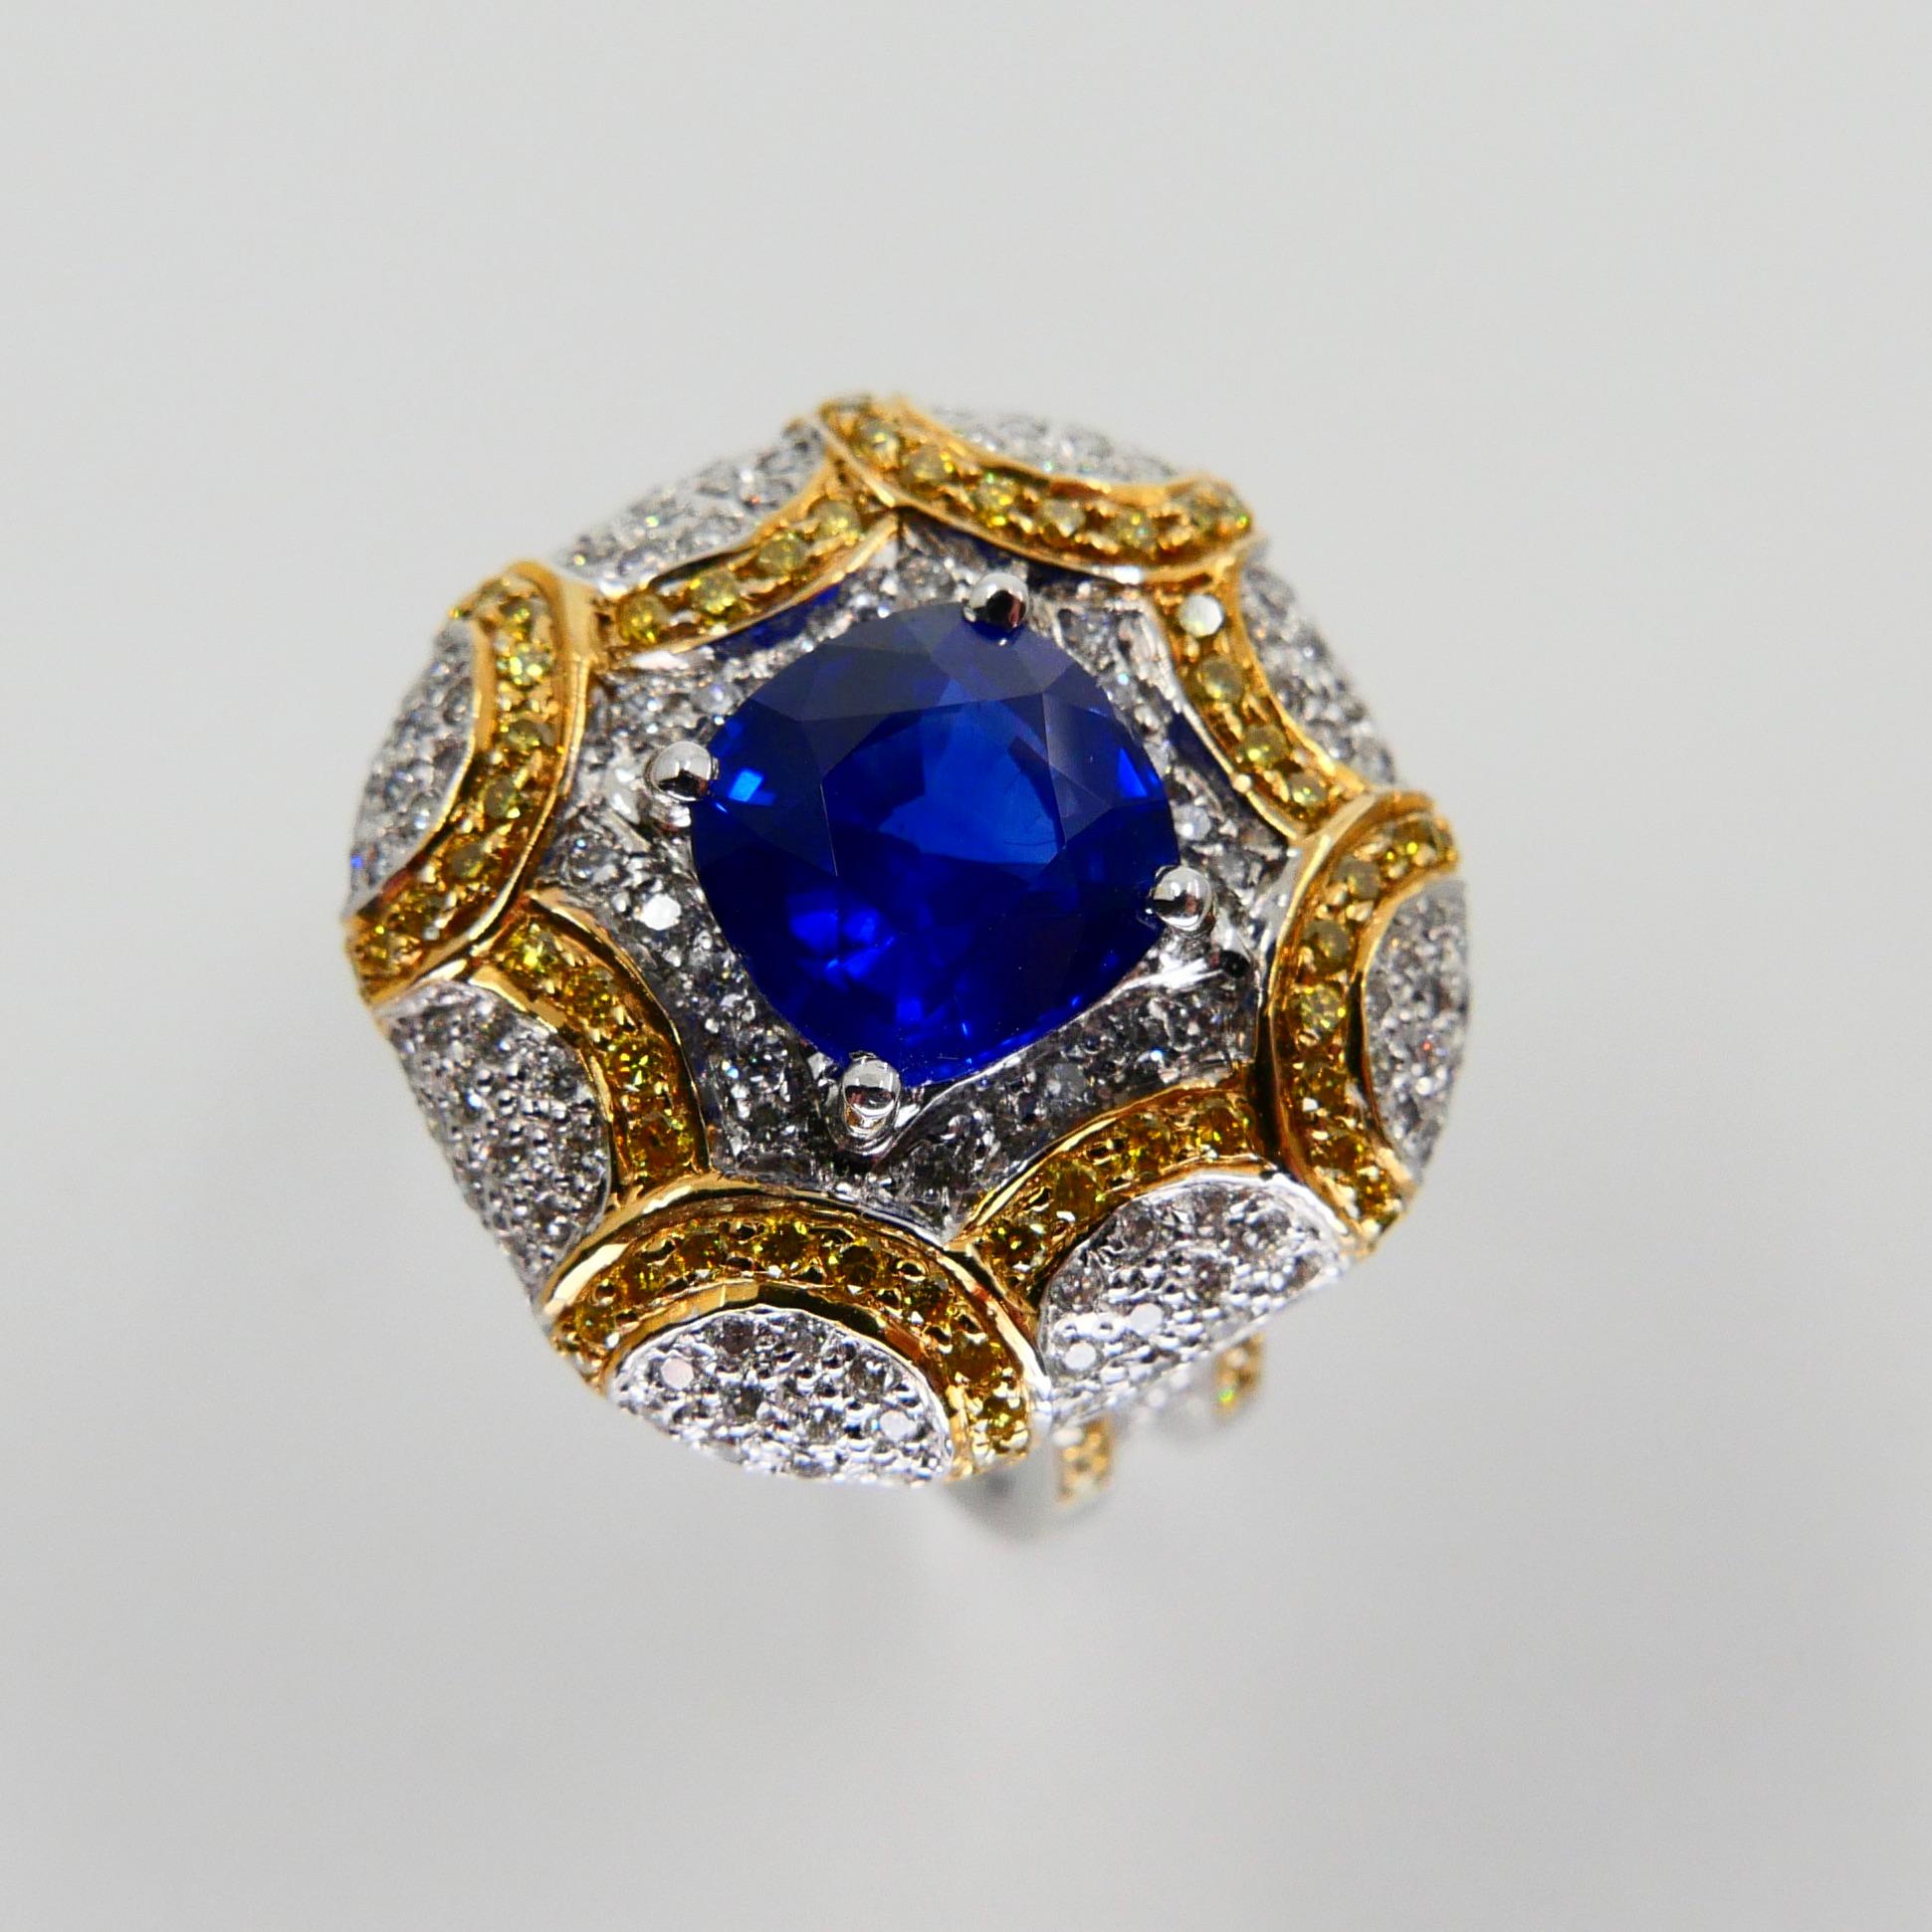 ICA Certified 1.74Cts Ceylon Heat Sapphire Ring, White and Fancy Yellow Diamonds For Sale 2